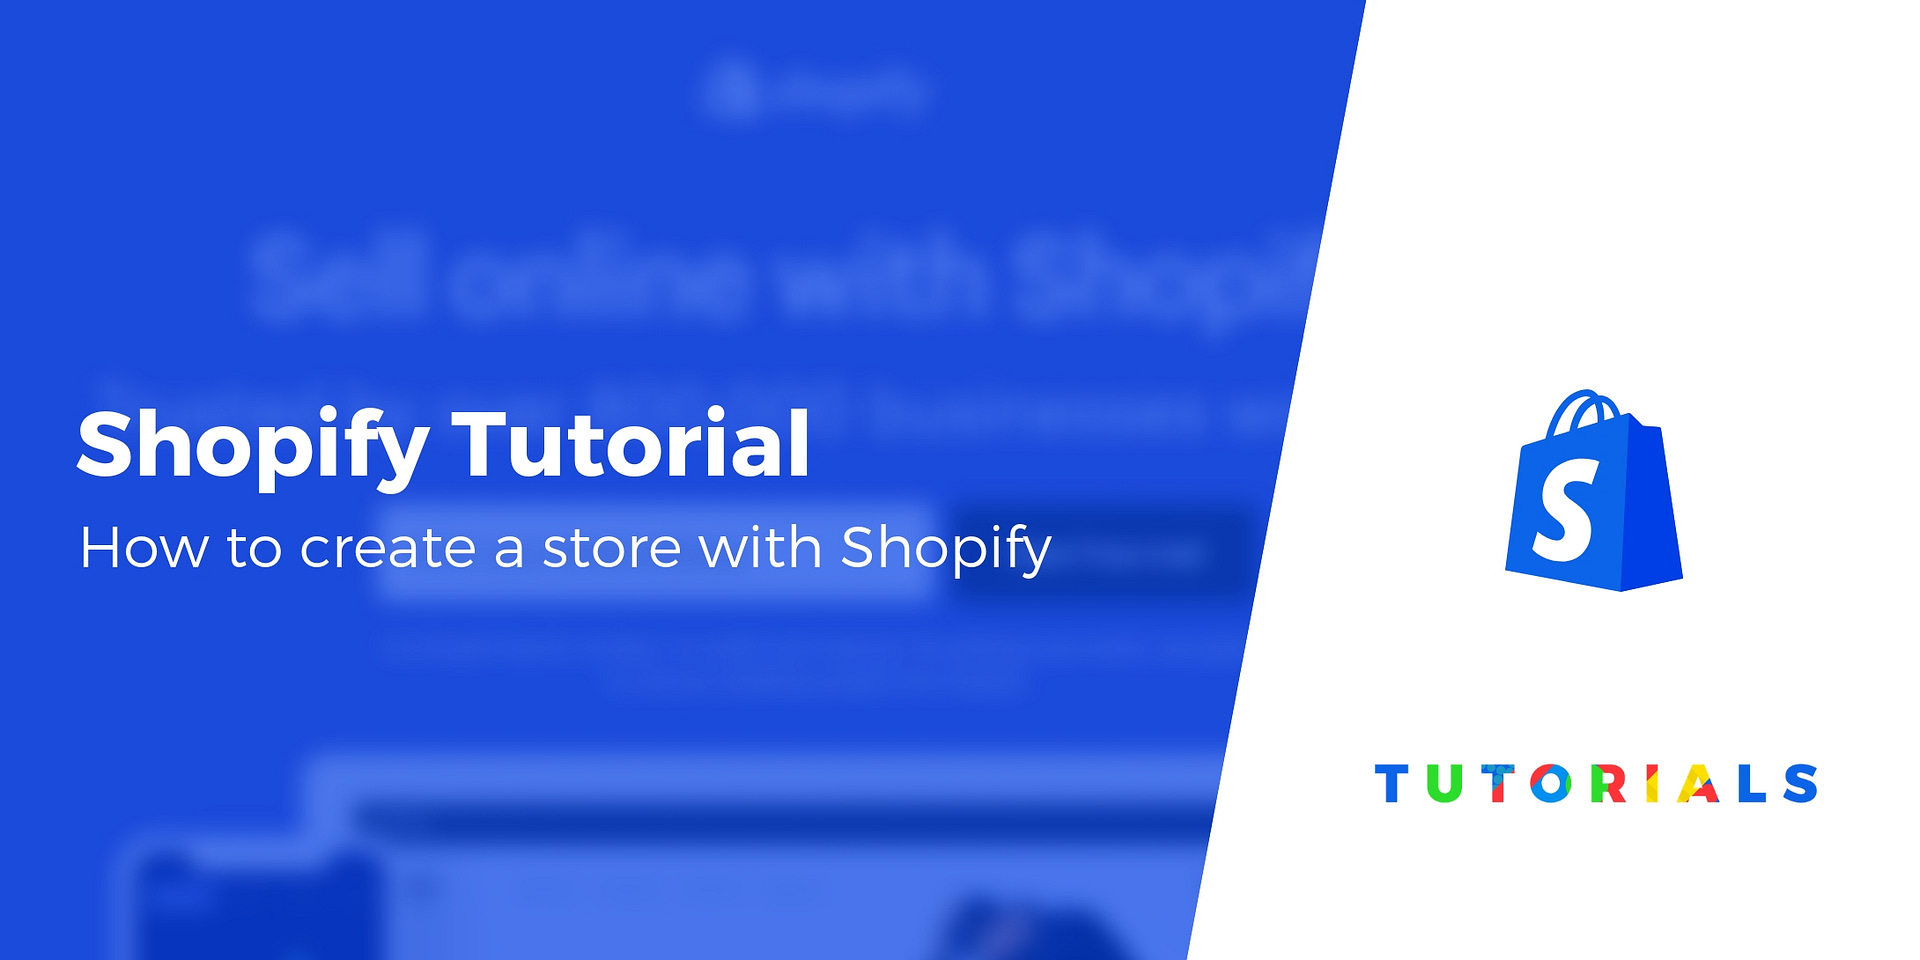 How To Login To Shopify Admin - Beginner's Guide